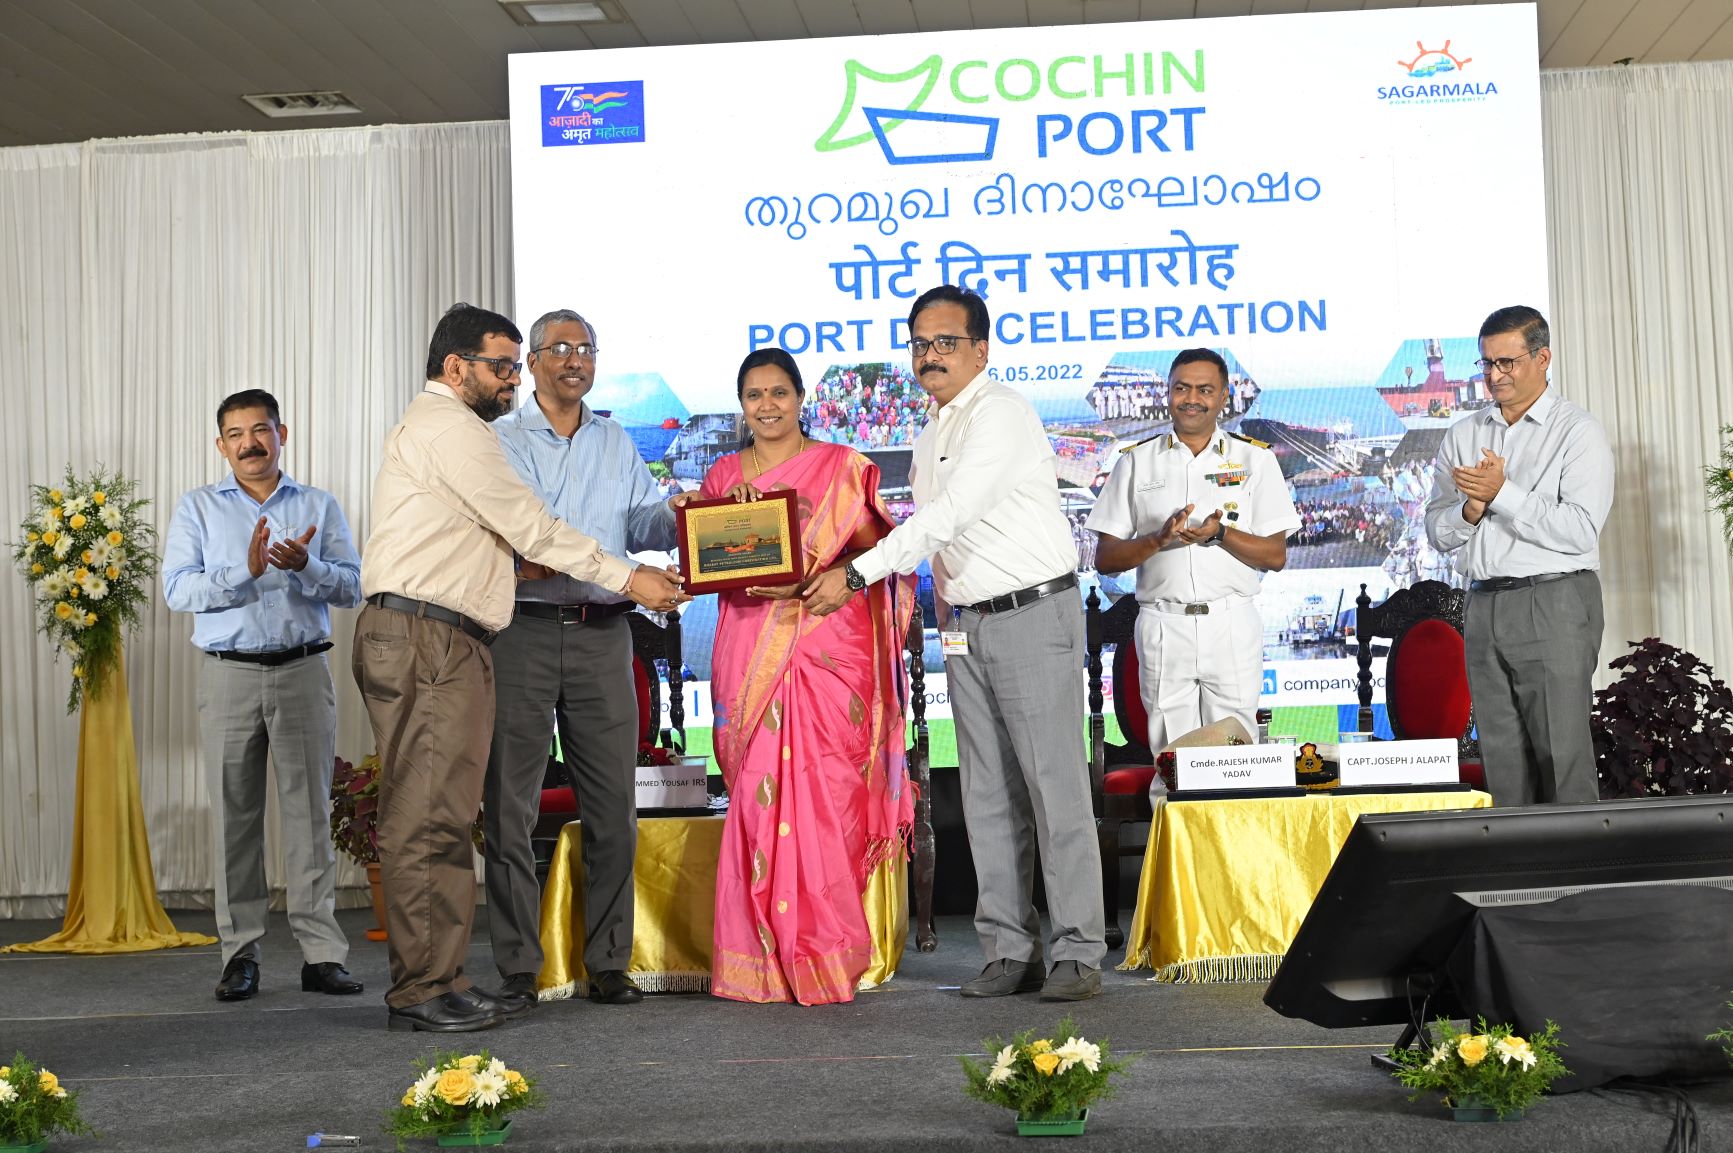 BPCL awarded for Excellence in "Business Performance in Cargo/Ship handling at Cochin Port" for 2021